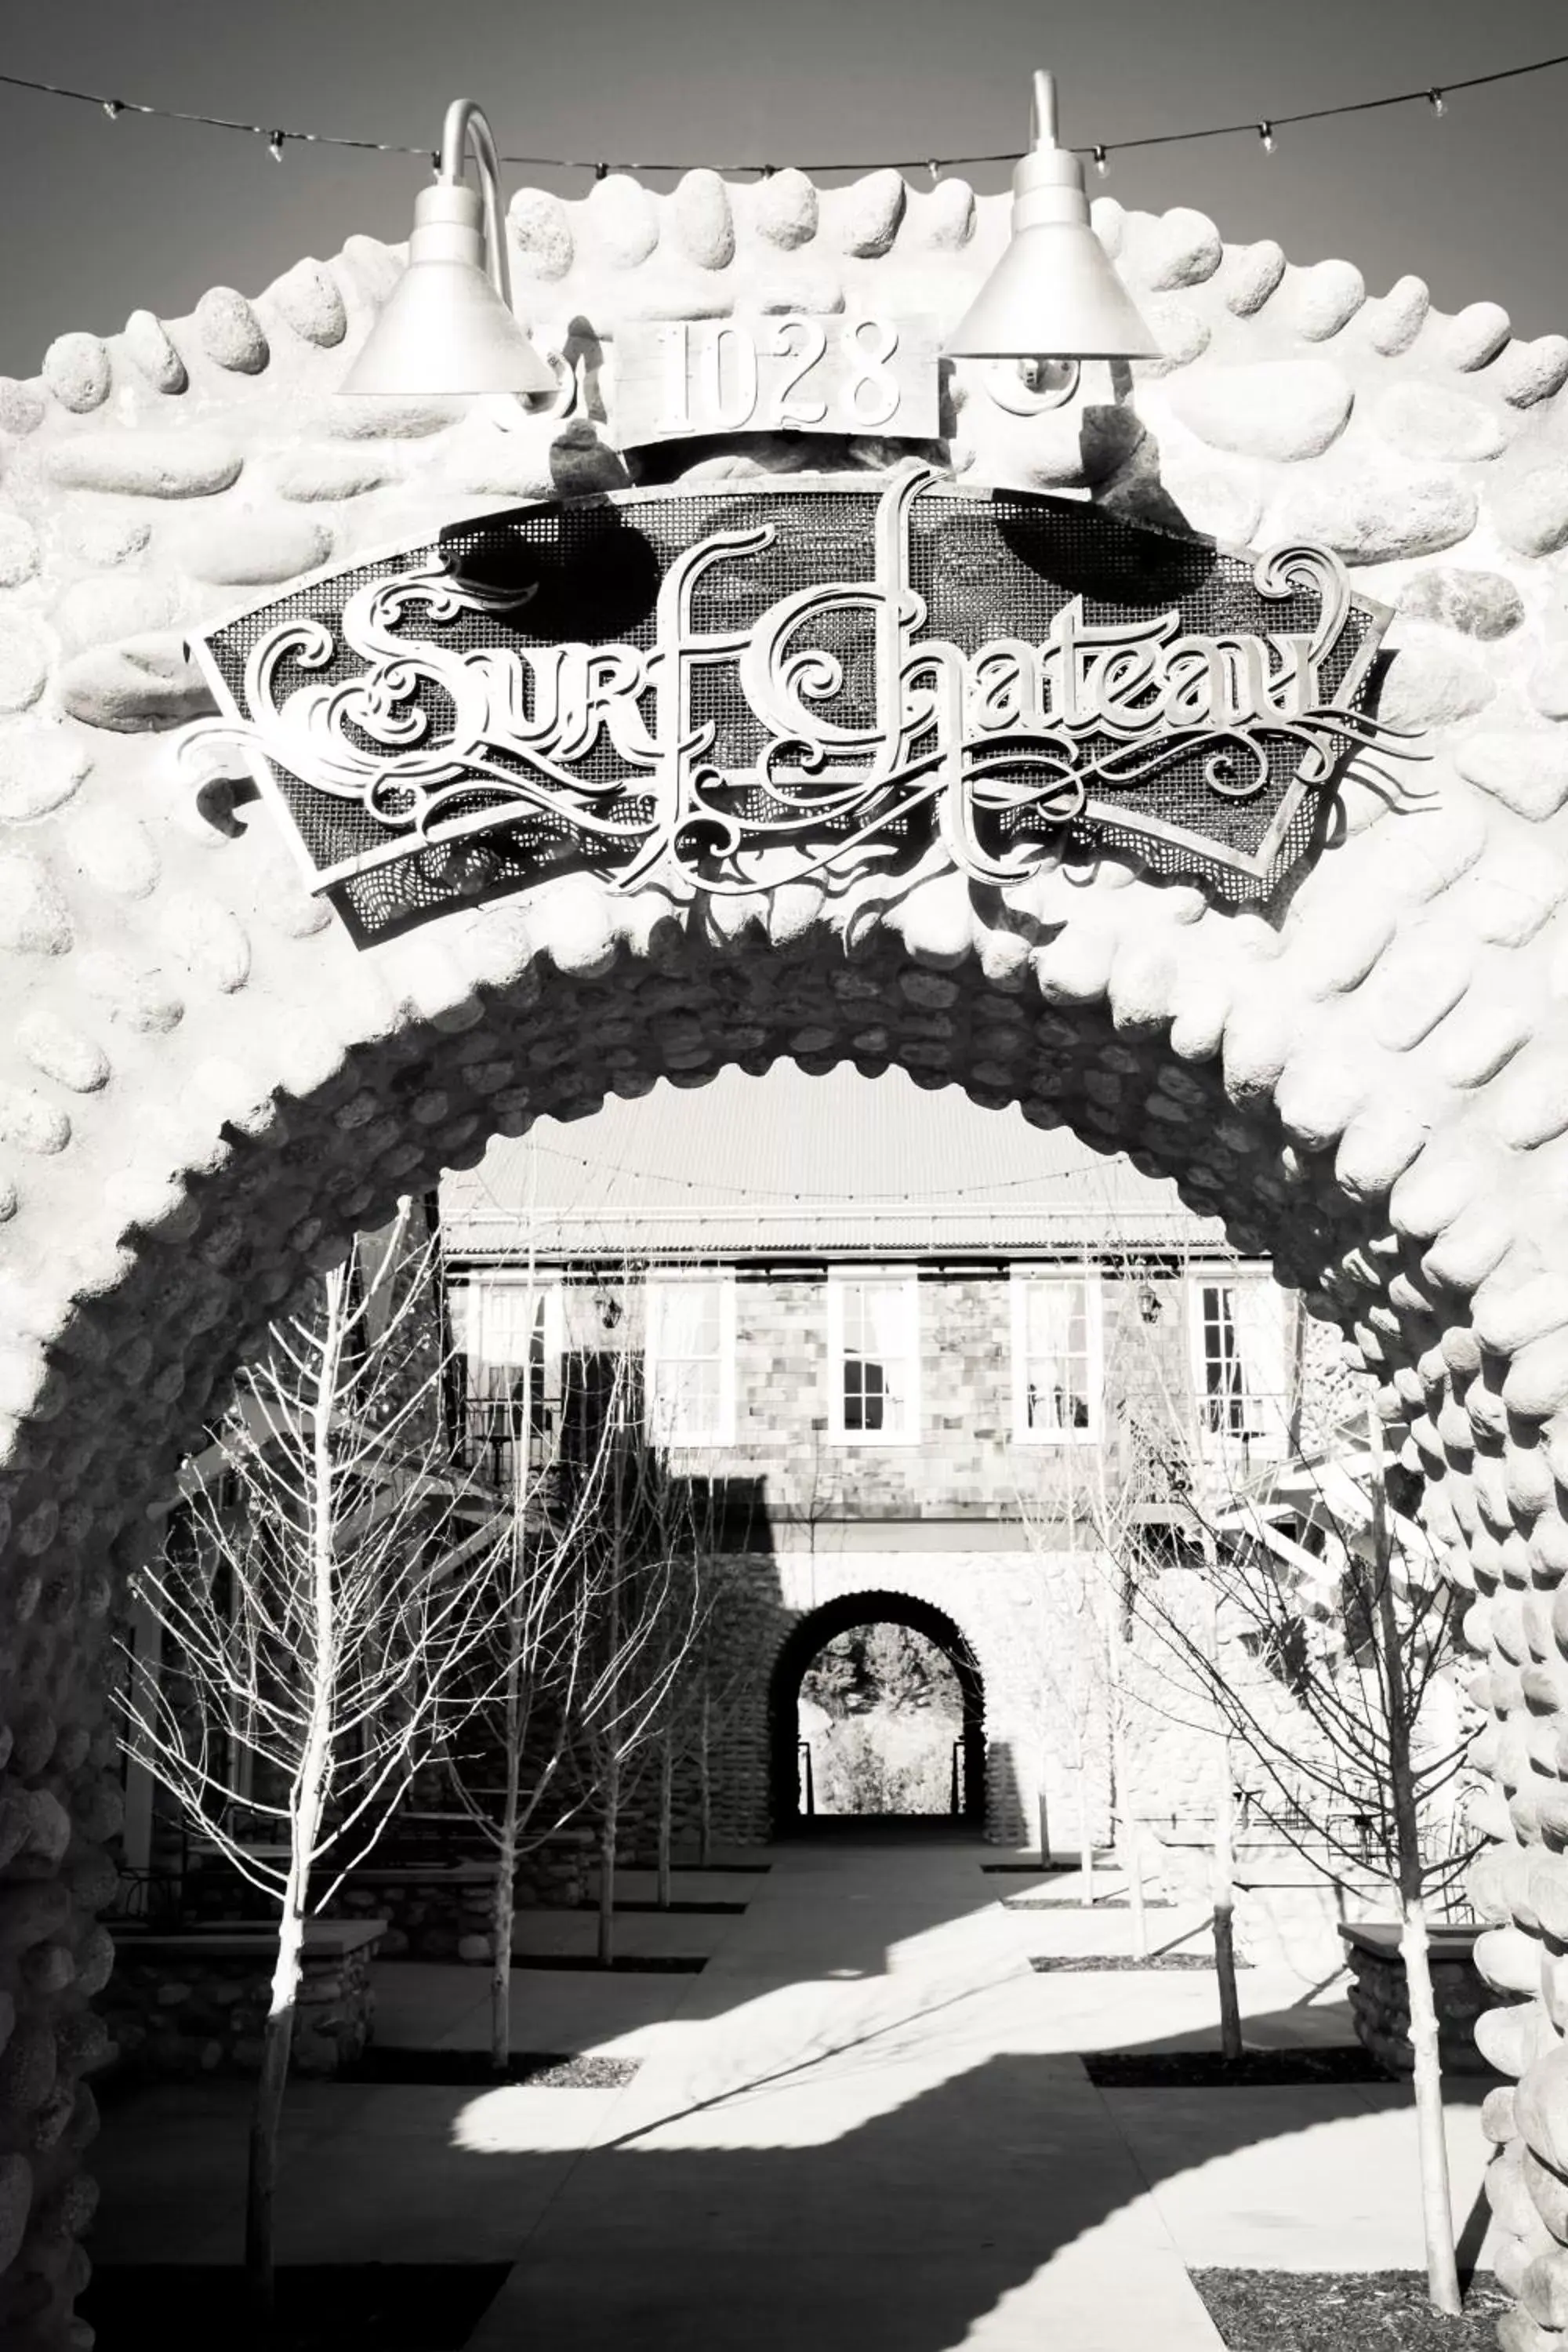 Facade/entrance, Winter in Surf Hotel & Chateau